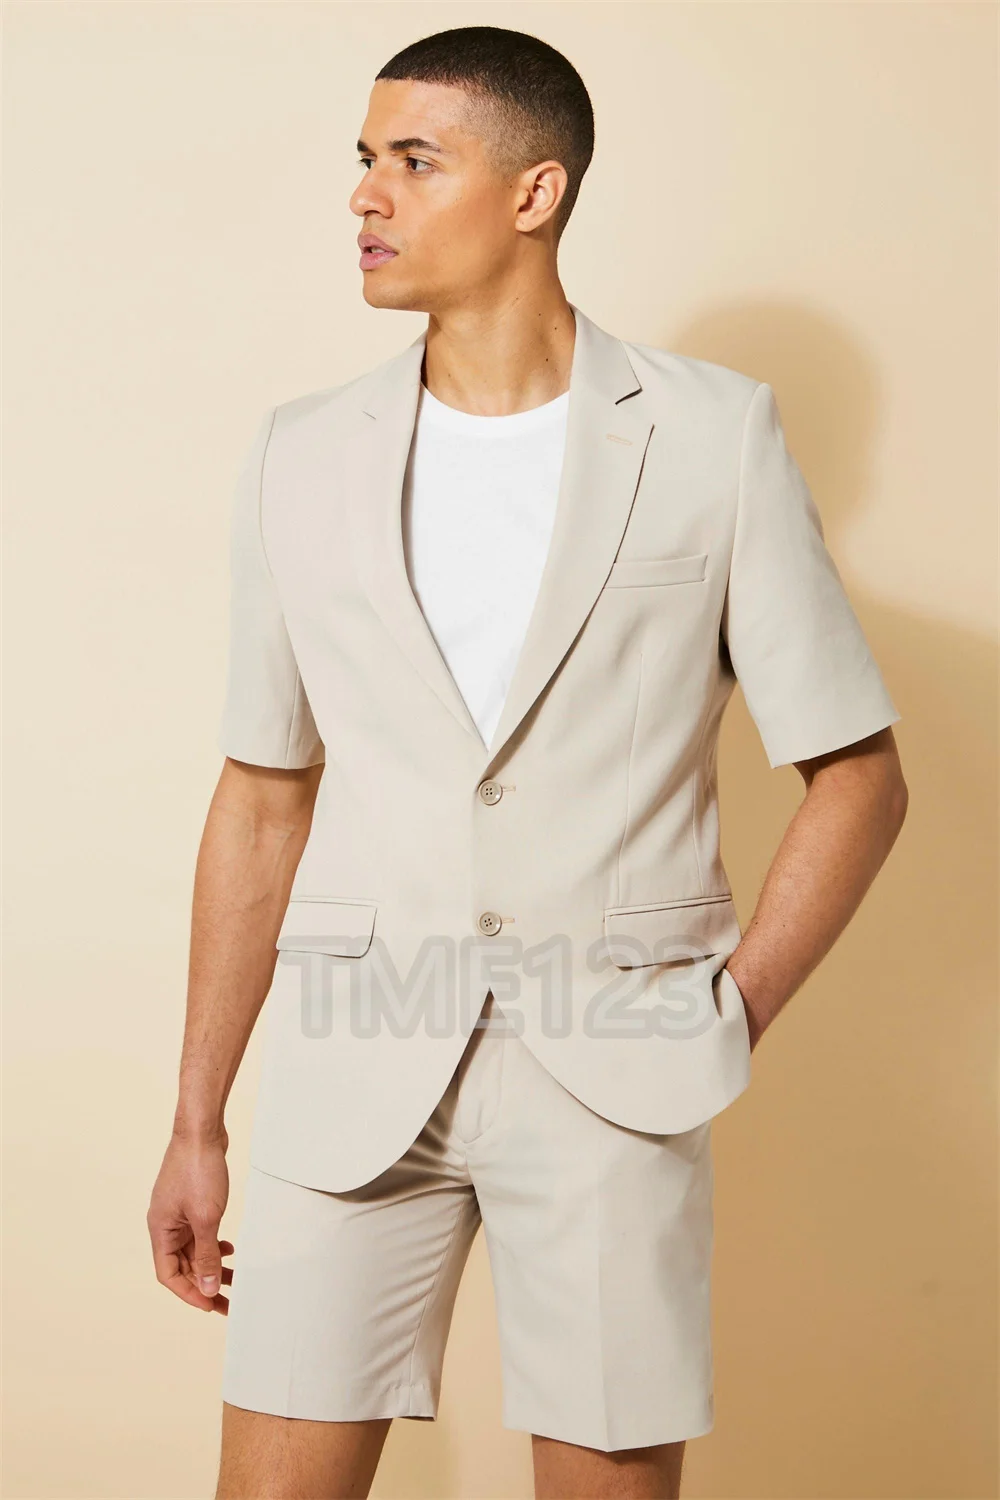 Tailored Made Champagne Mens Suits Short Pants Summer Beach Groom Suit Casual Business Wedding Best Man Blazer